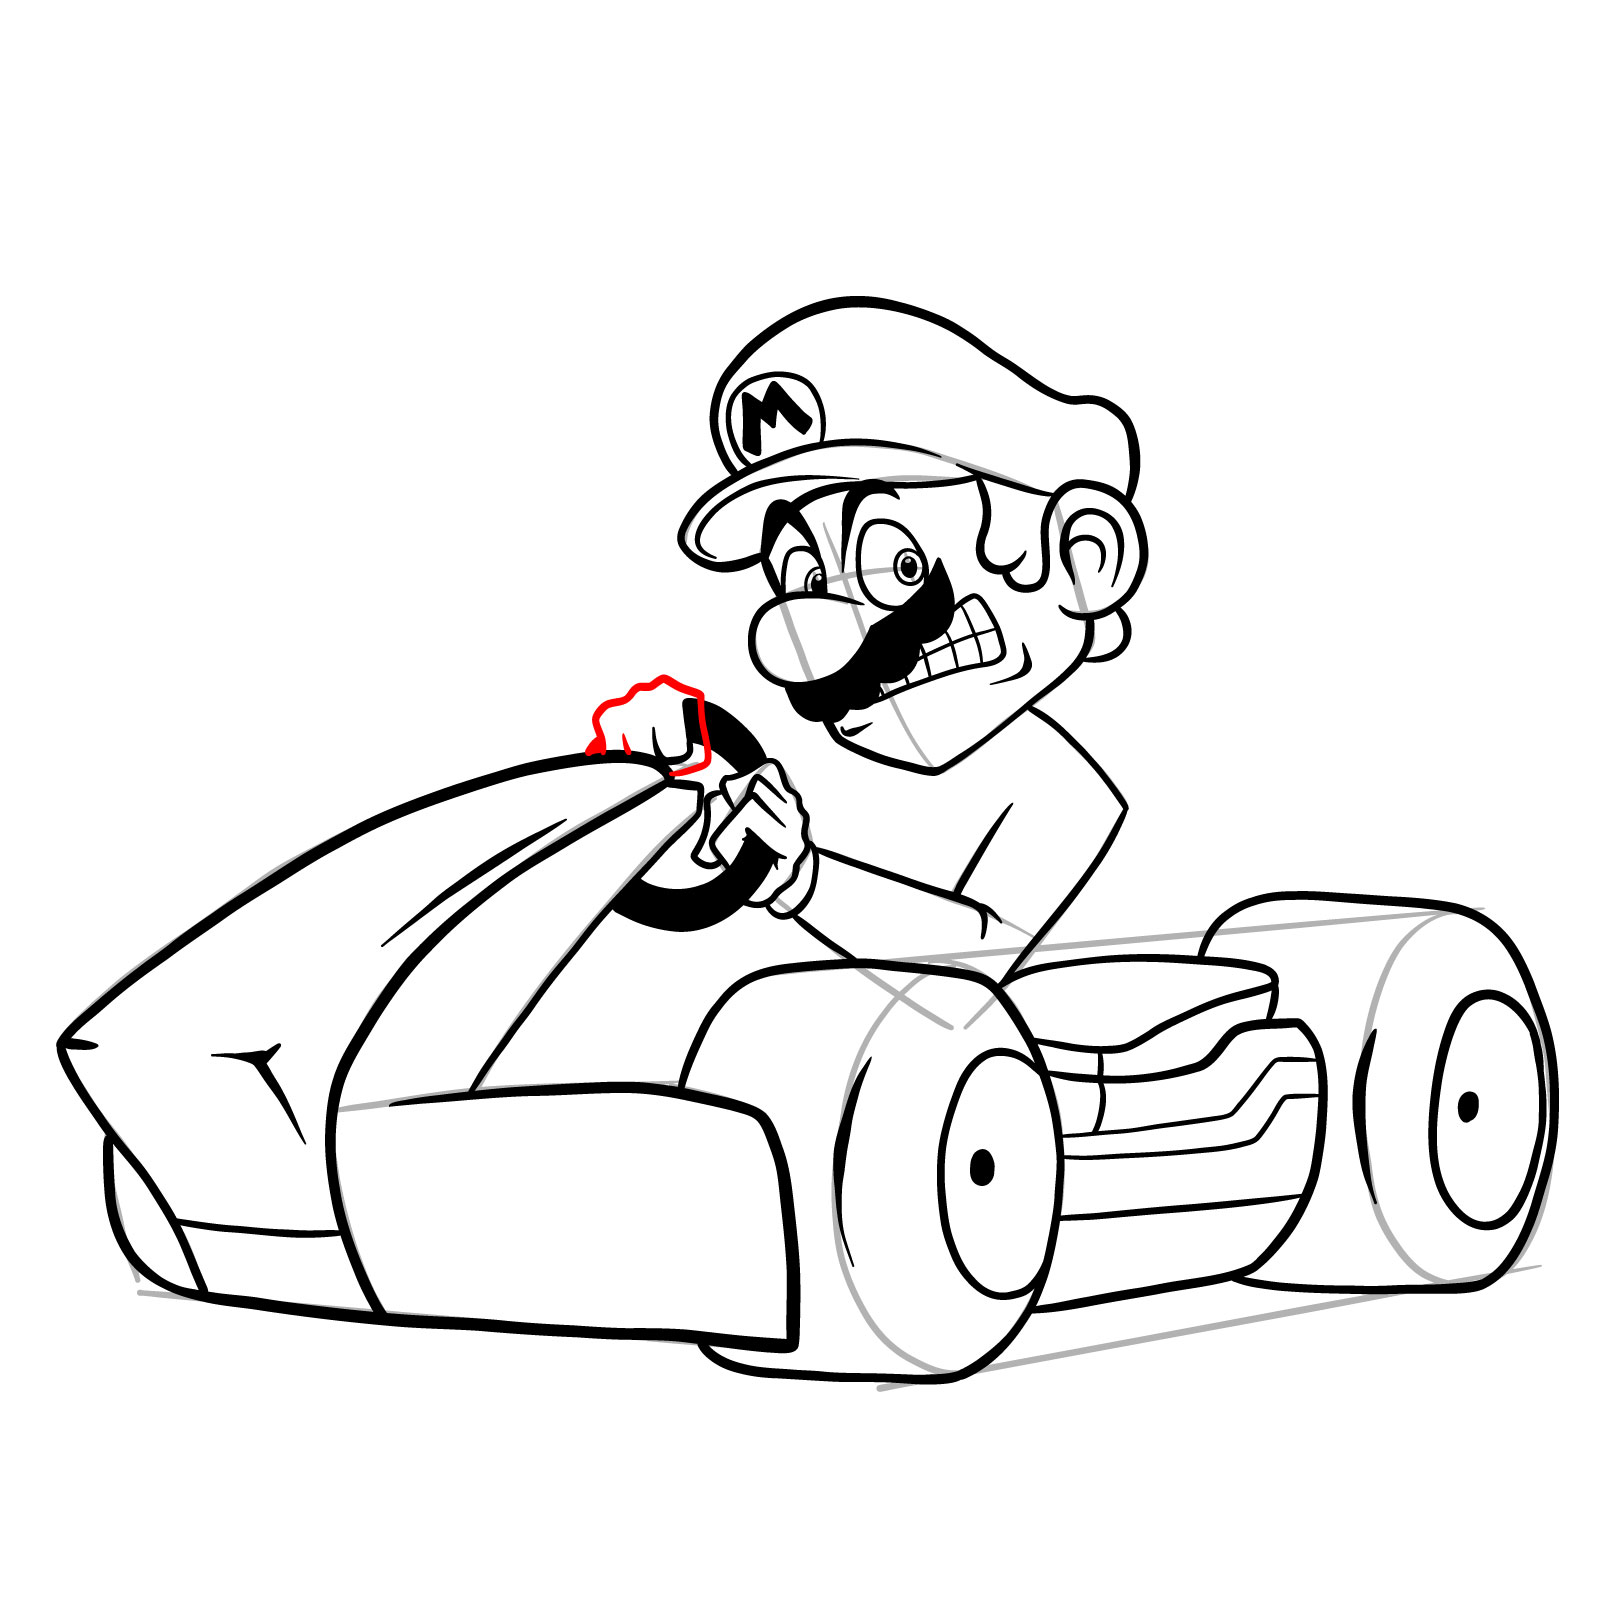 How to draw Race Traitors Mario - step 33